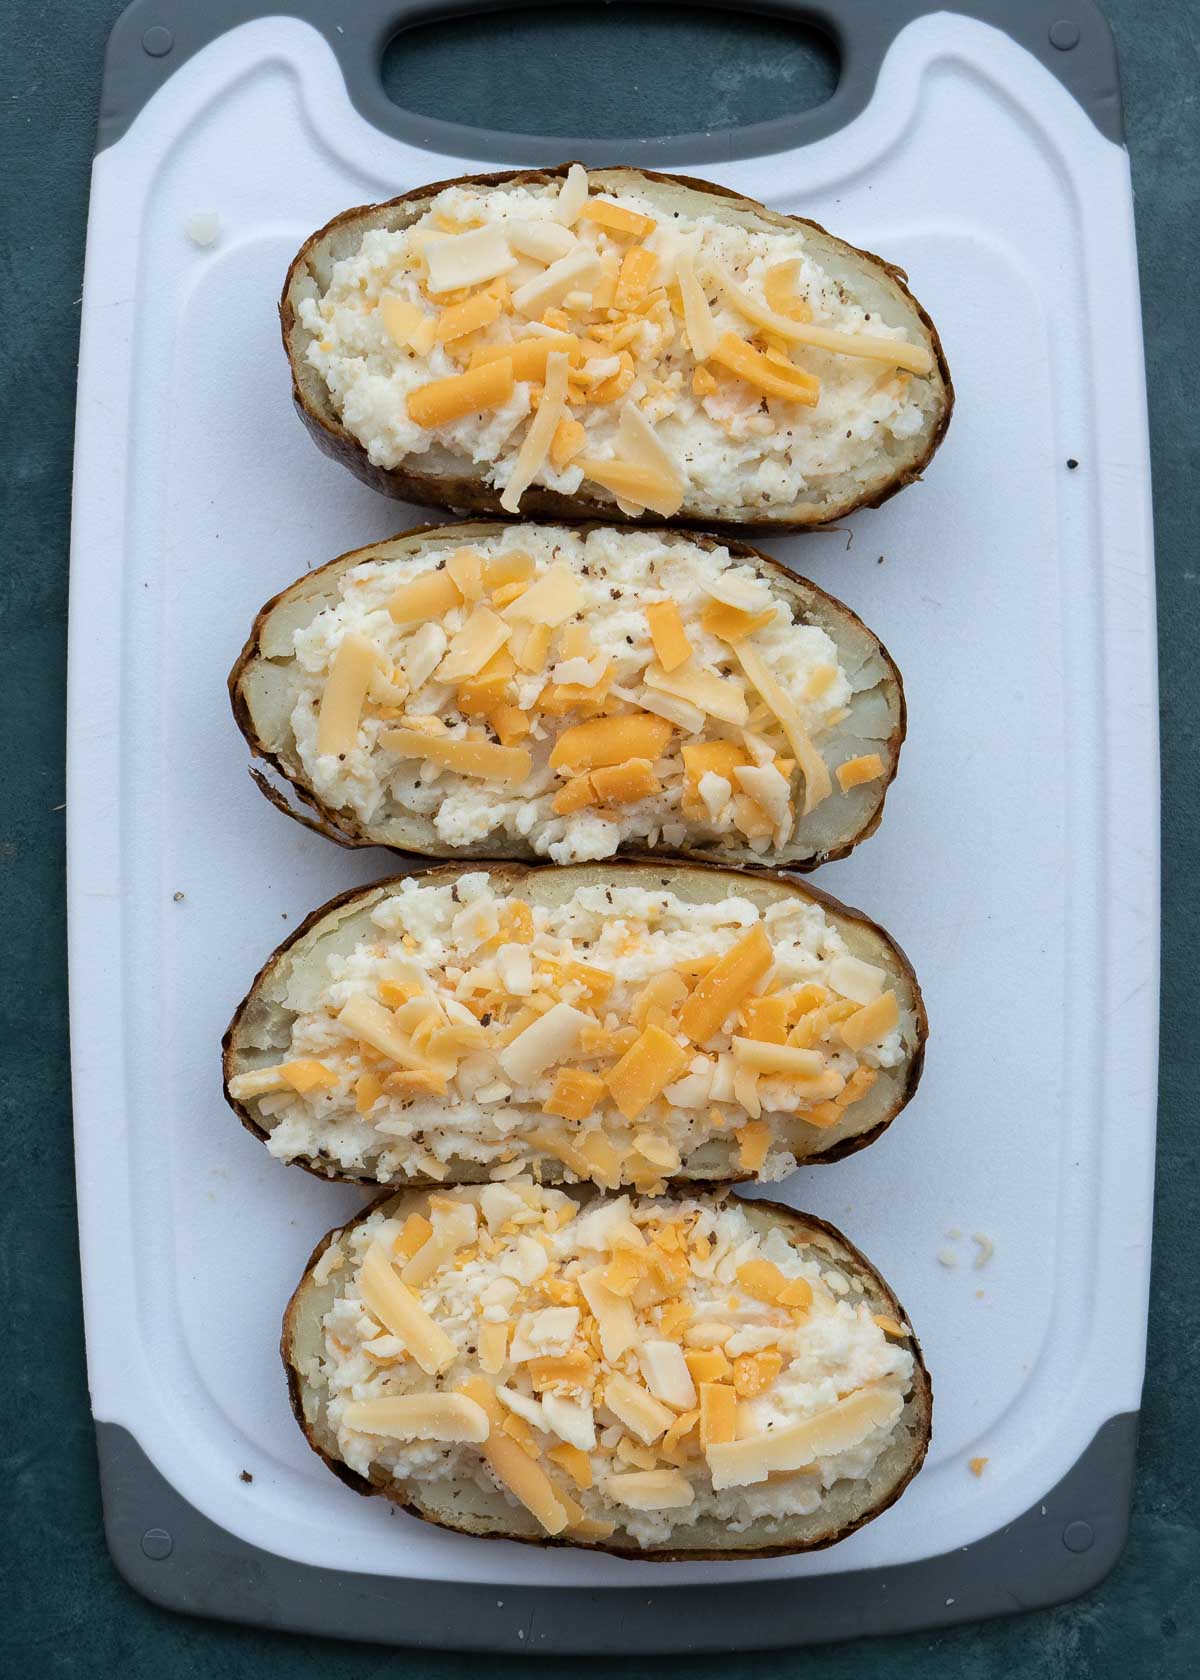 top with remaining shredded cheese